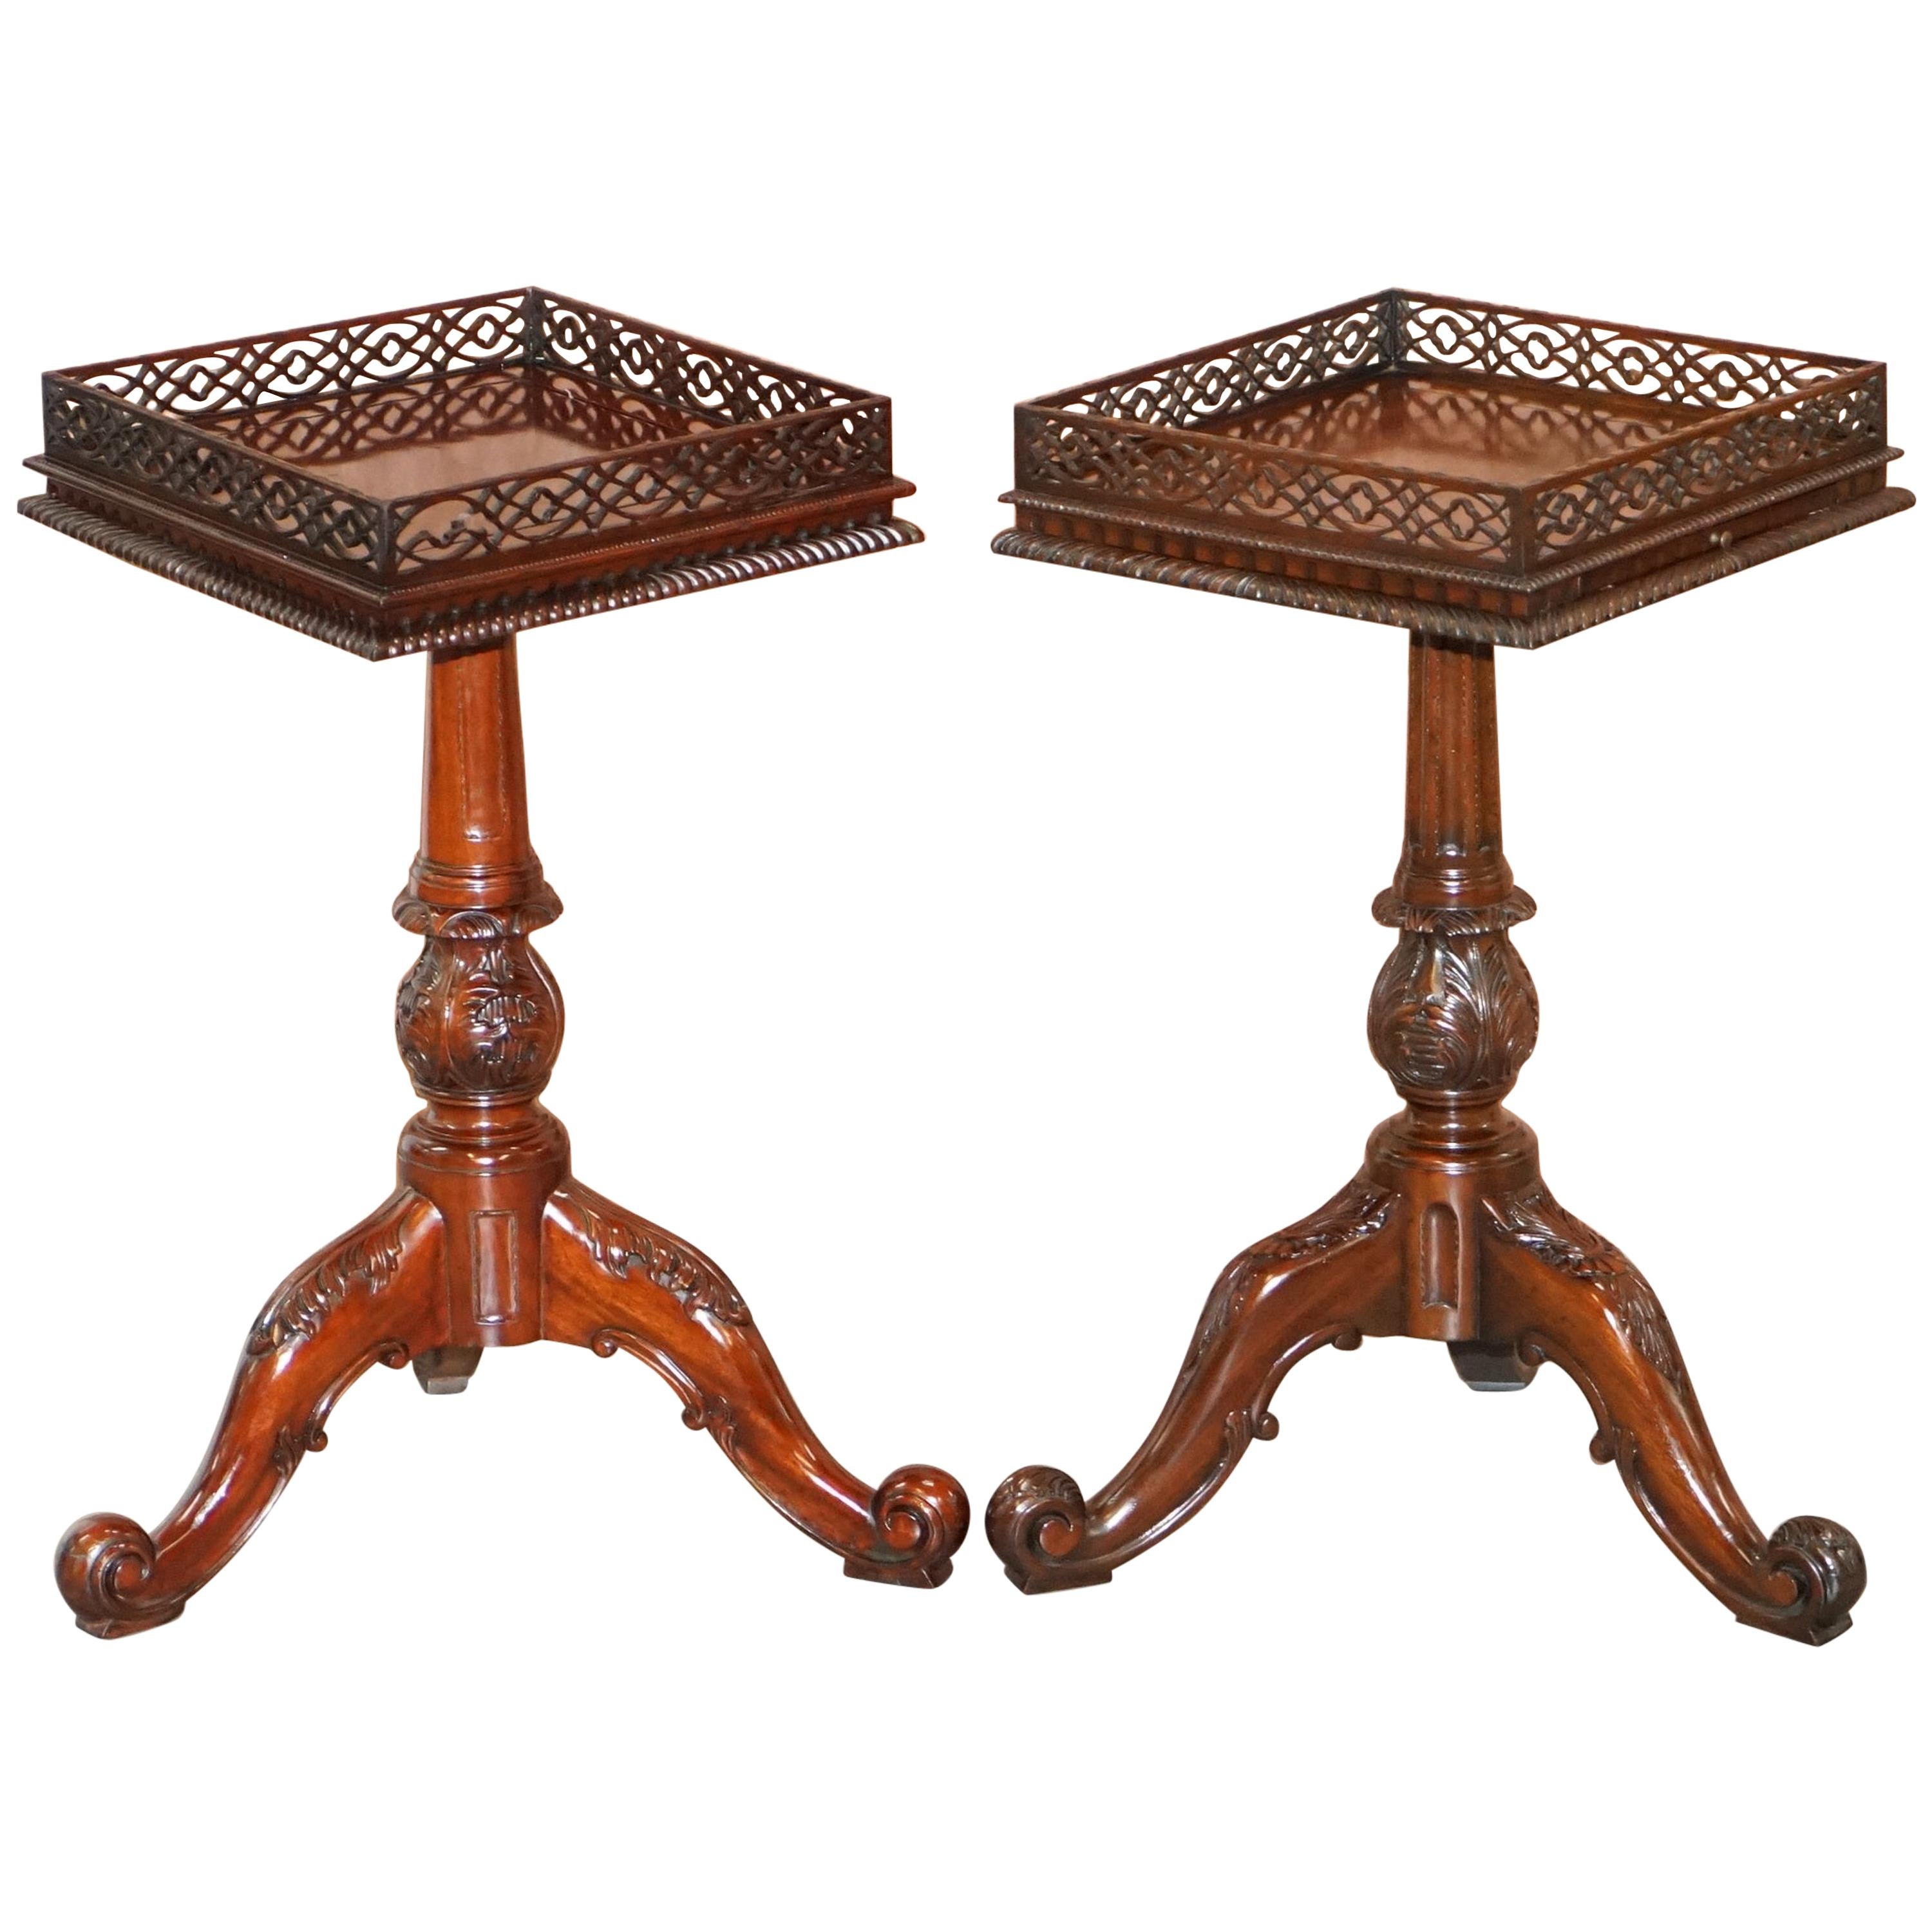 Pair of Mahogany Fretwork Gallery Carved Side End Tables Chippendale Revival